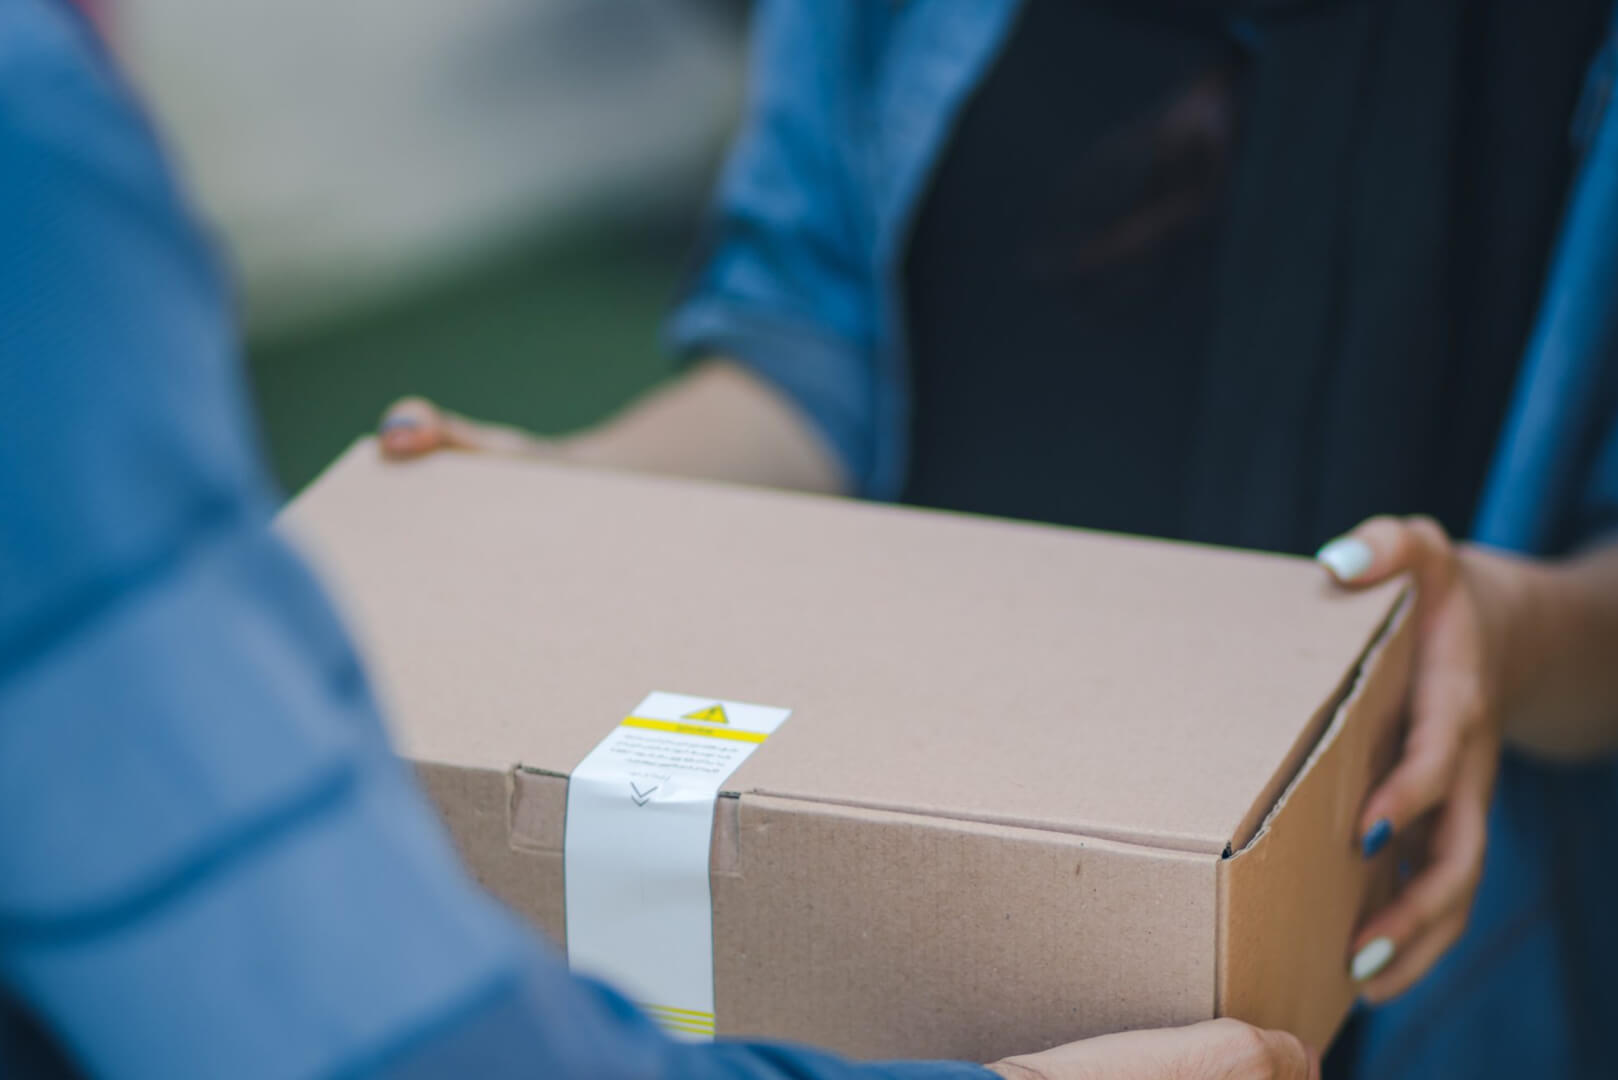 Image of a person handing over a box to another person